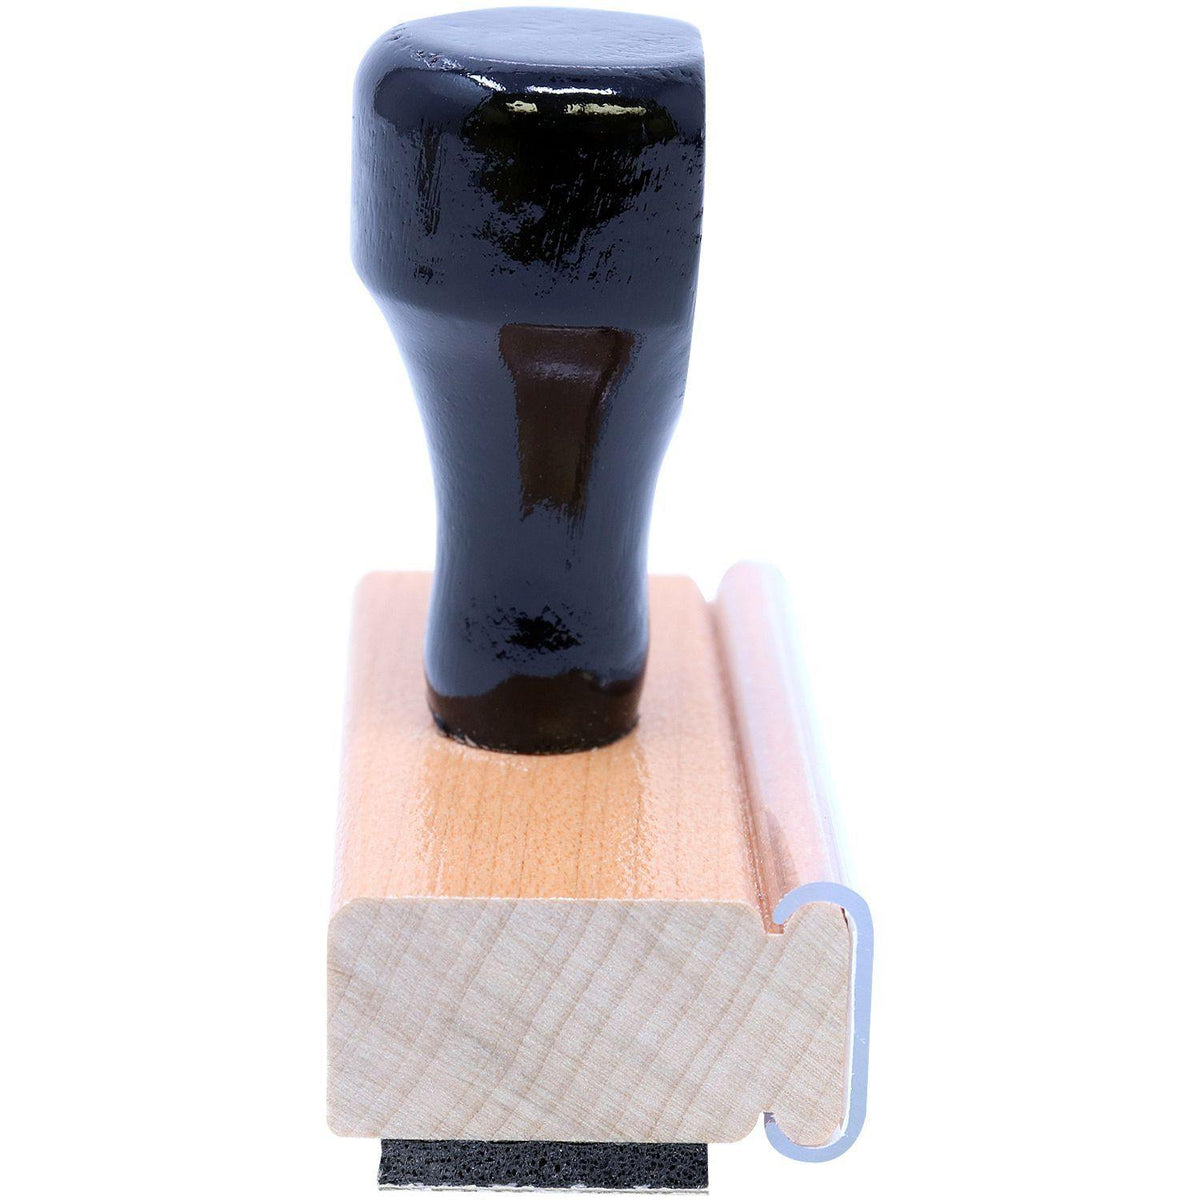 Narrow Font Original Rubber Stamp - Engineer Seal Stamps - Brand_Acorn, Impression Size_Small, Stamp Type_Regular Stamp, Type of Use_General, Type of Use_Office